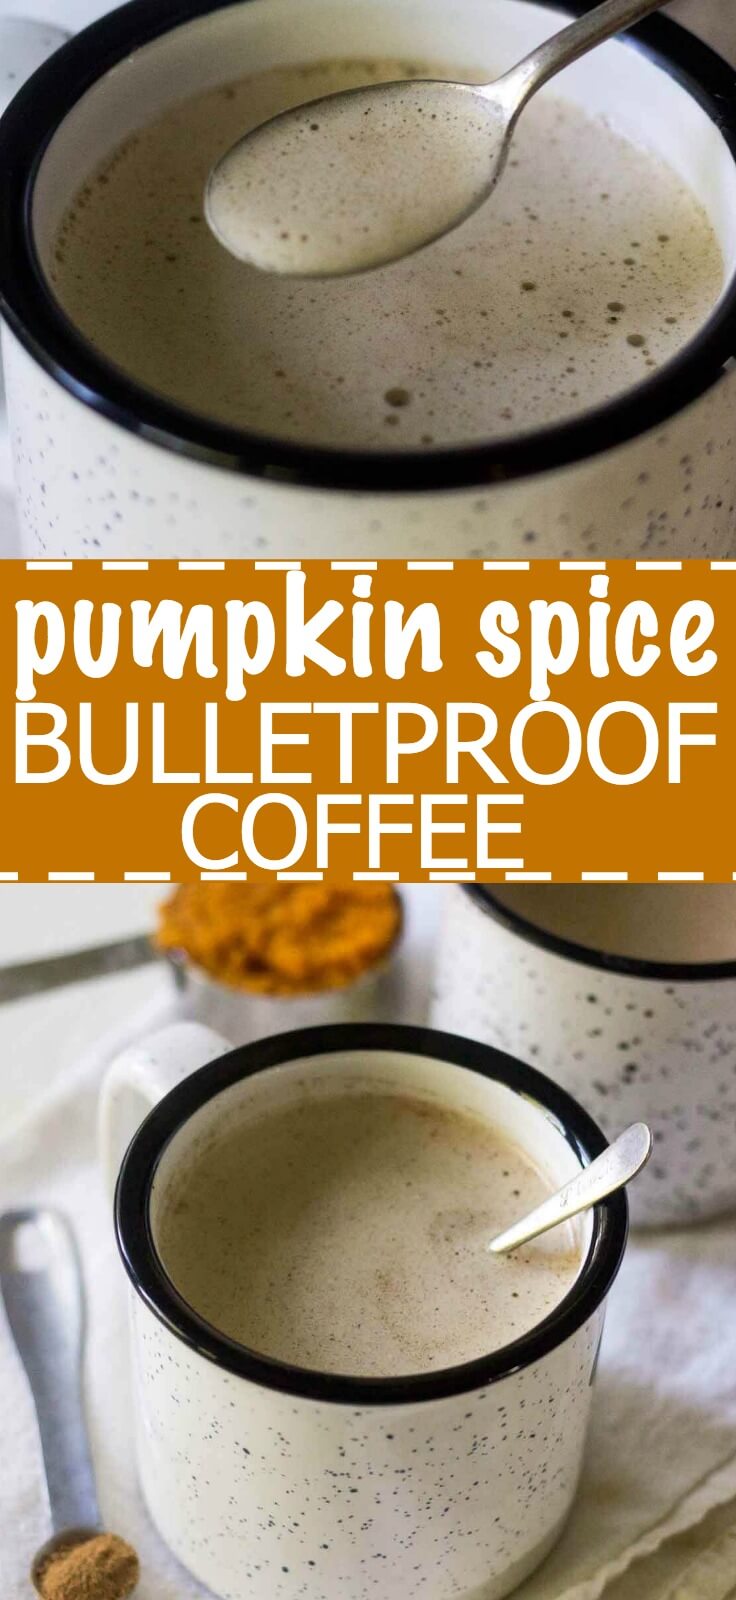 Bulletproof coffee is not your average morning cup of Joe. Bulletproof coffee is a superfood drink that gives you energy and better cognitive function. It keeps you full longer and helps you perform at your highest potential.